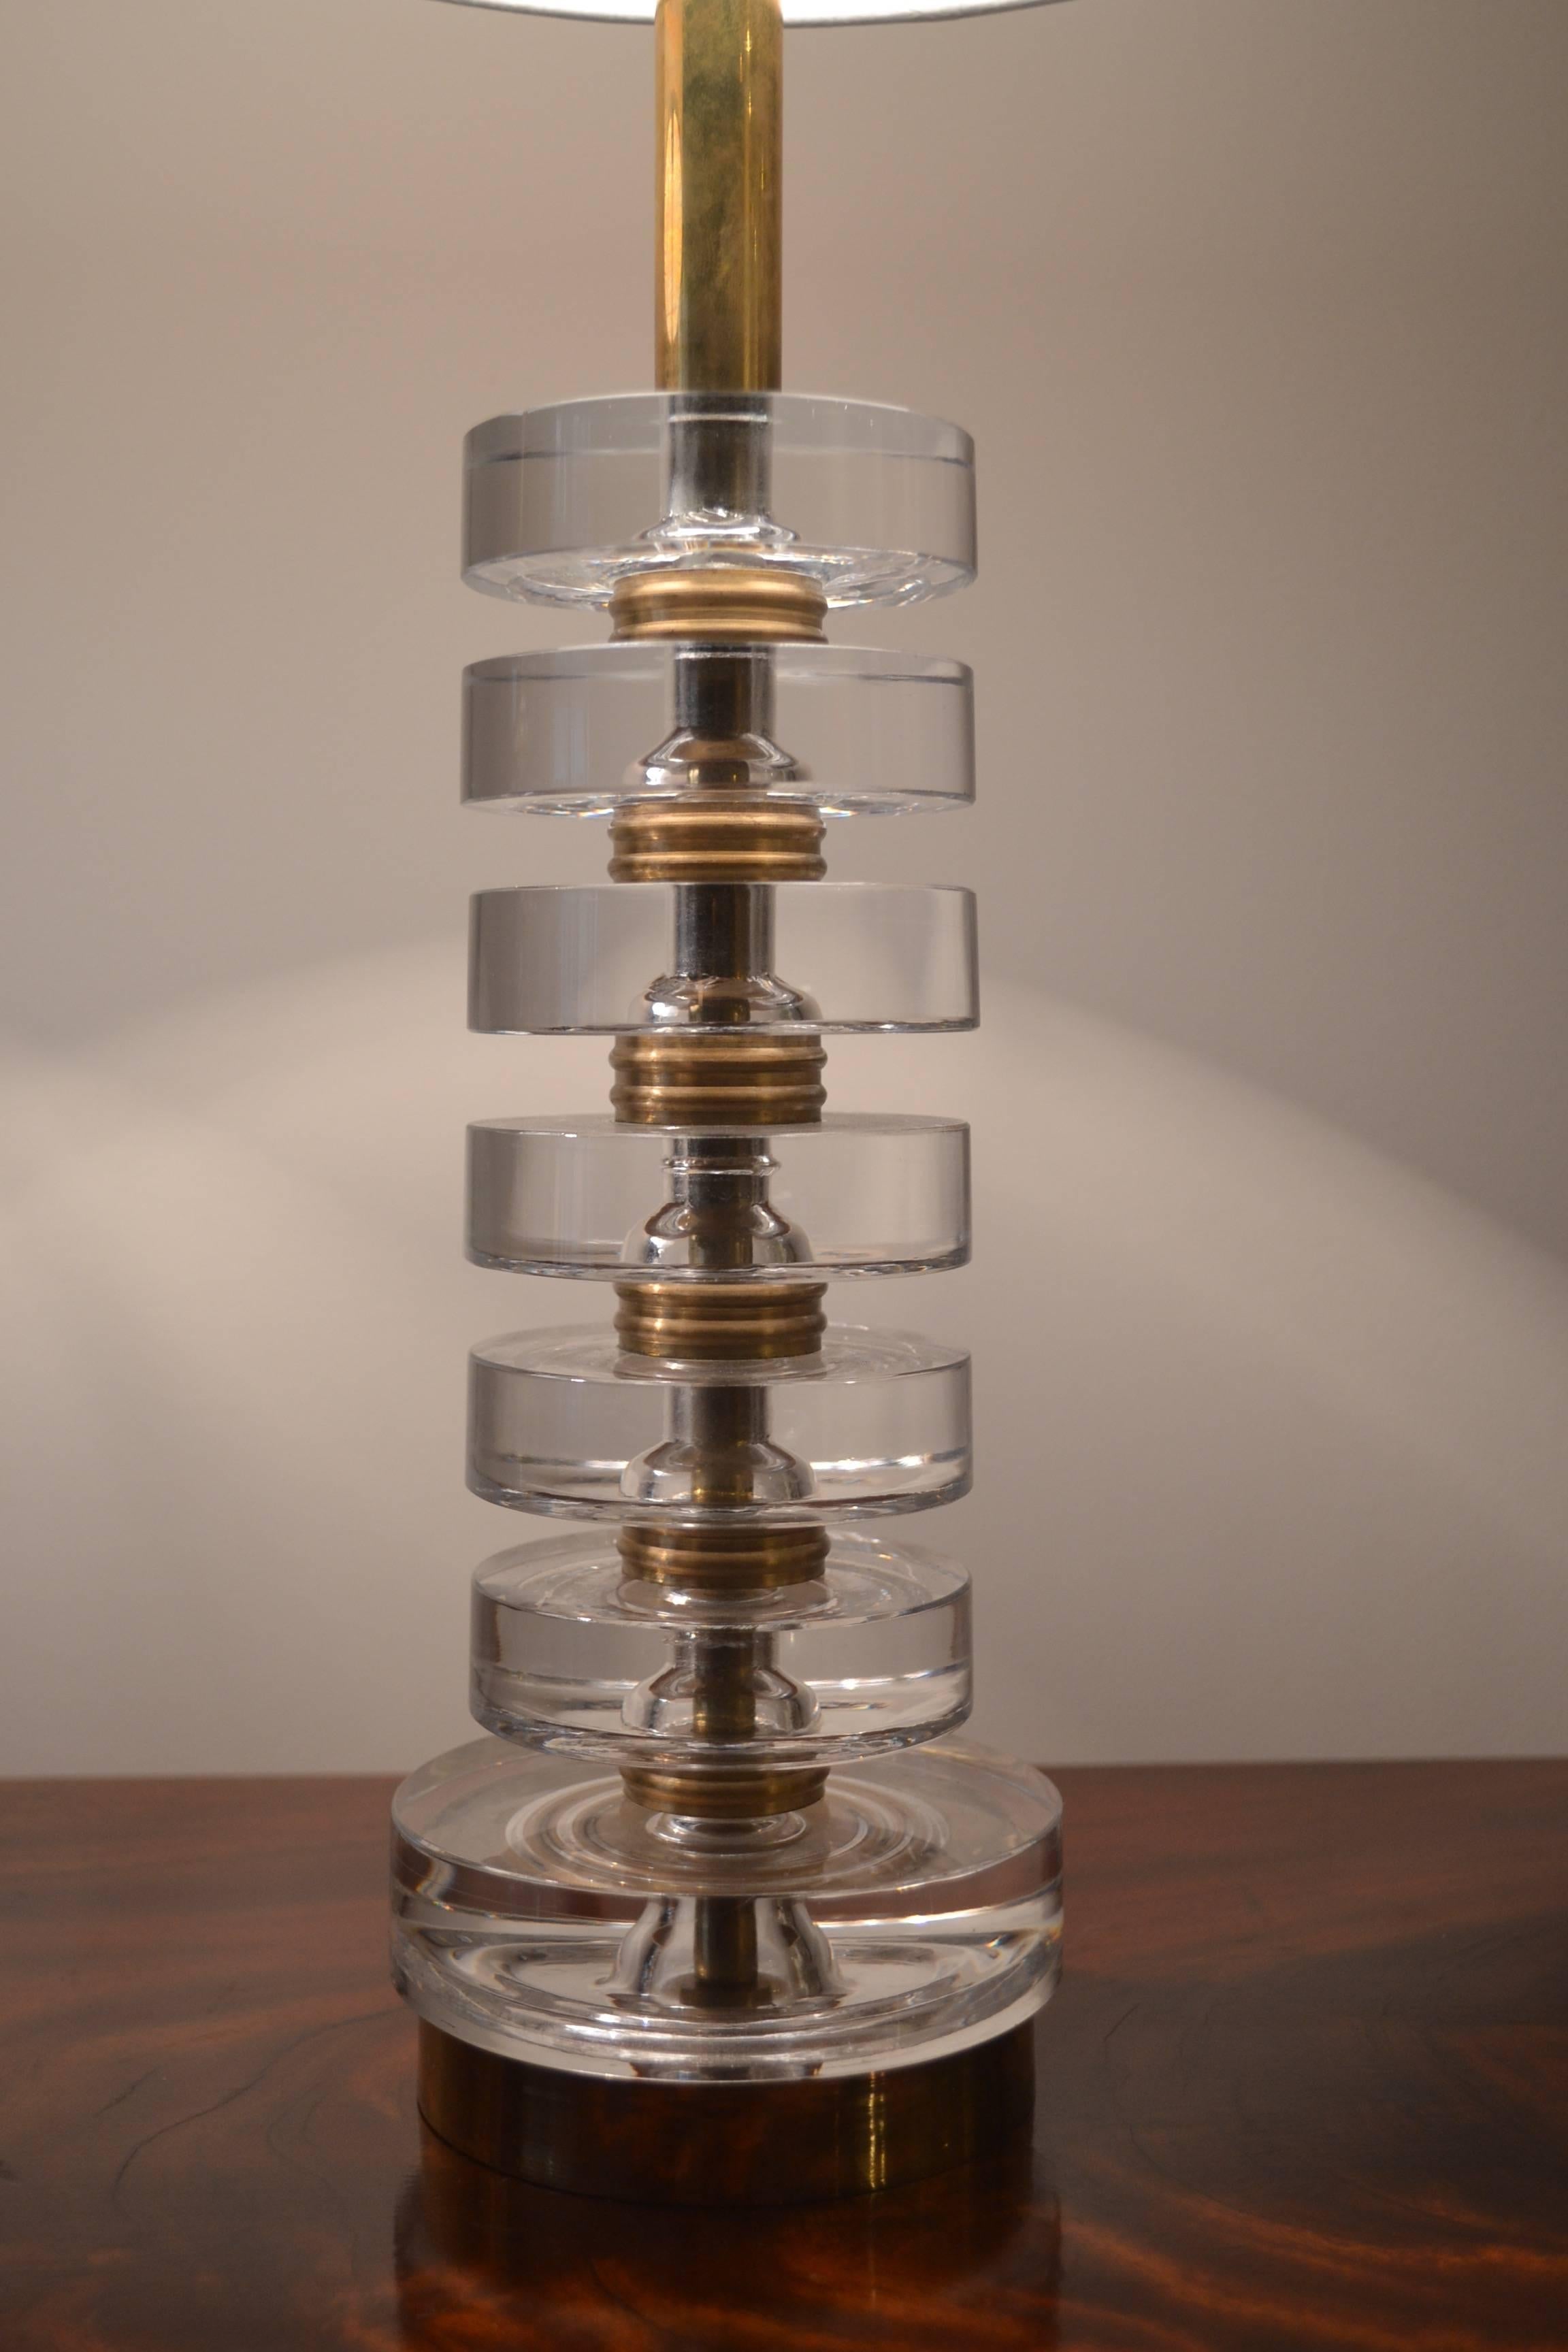 Pair of lamps in glass and brass by Carl Fagerlund for Orrefors, circa 1960s.
Stacked glass discs with brass details. Newly rewired with new shades.

18